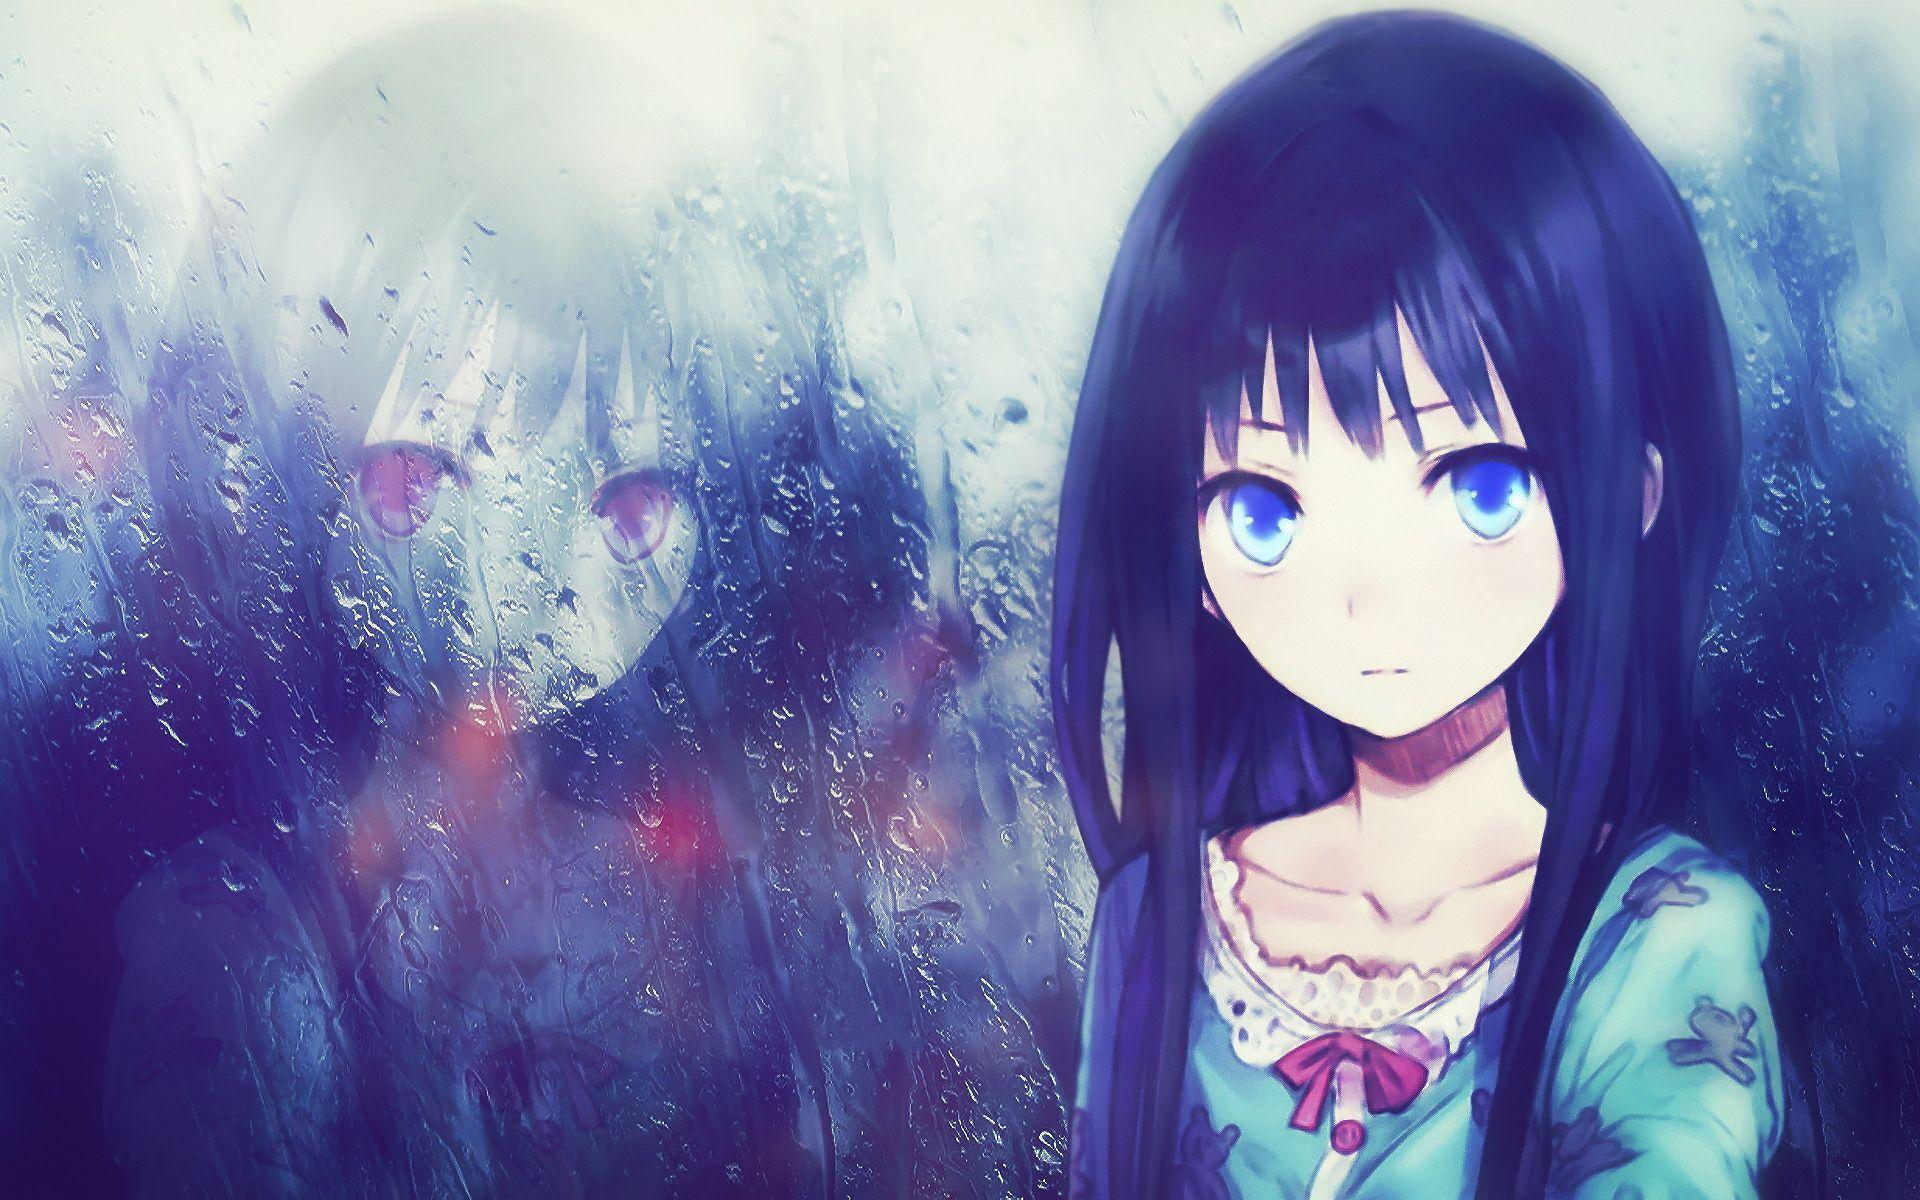 Lonely Anime Girl Wallpaper Free Lonely Anime Girl